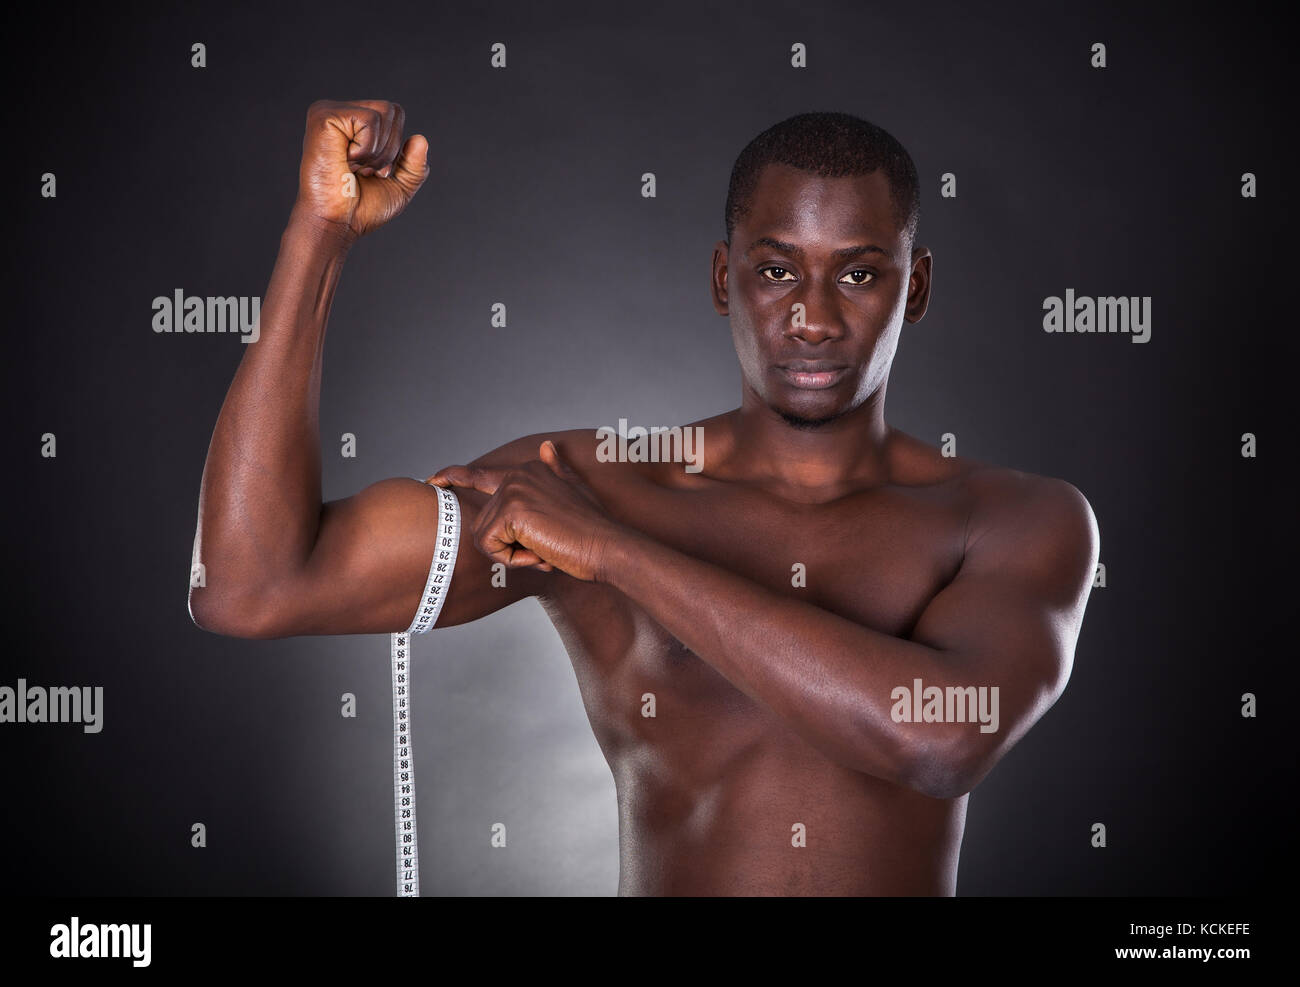 https://c8.alamy.com/comp/KCKEFE/man-measuring-his-biceps-with-measuring-tape-on-white-background-KCKEFE.jpg